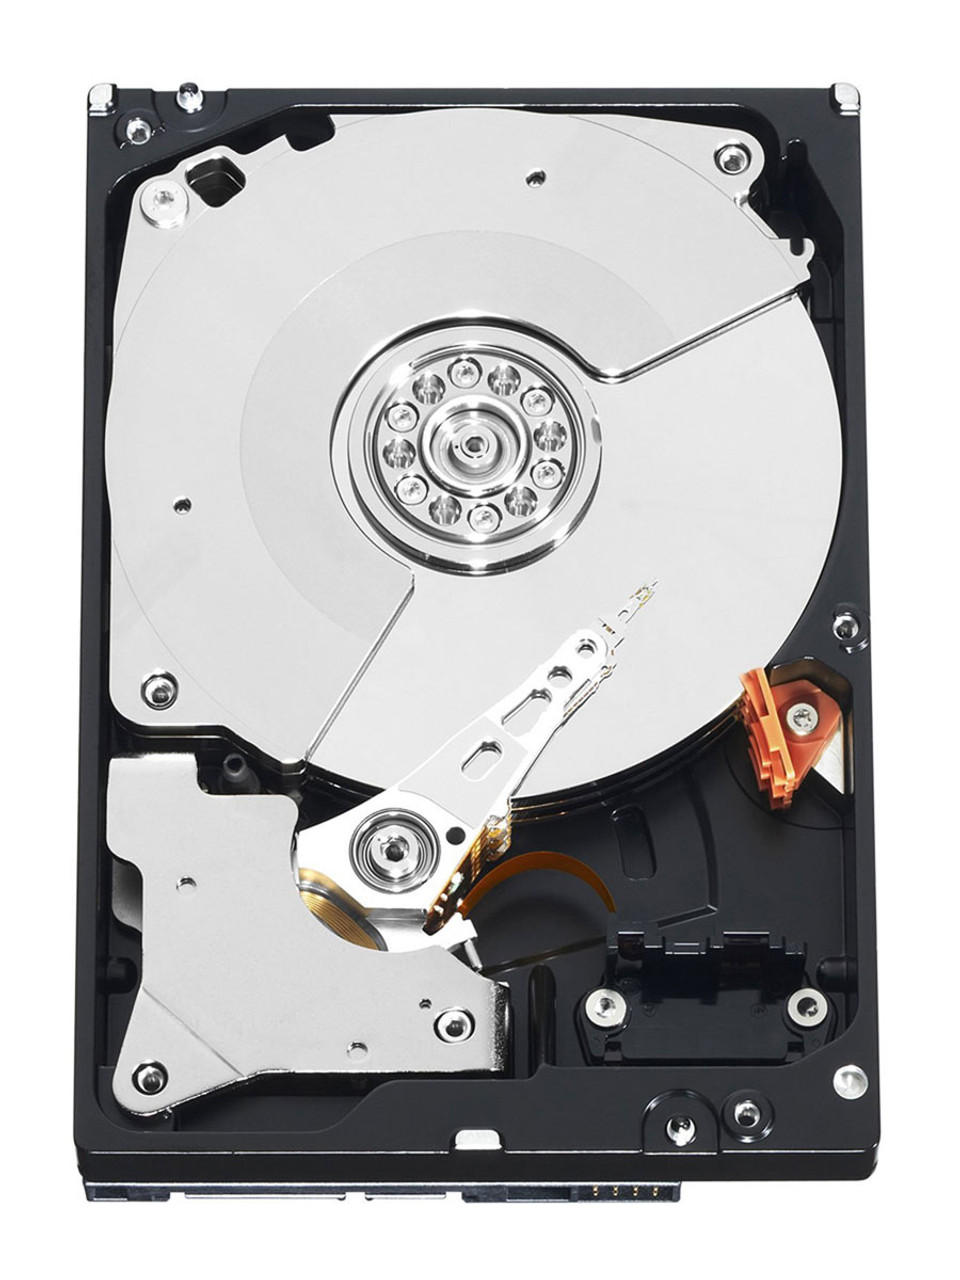 8K146-U Dell 36GB 10000RPM Ultra-160 SCSI 80-Pin Hot Swap 4MB Cache 3.5-inch Internal Hard Drive with Tray